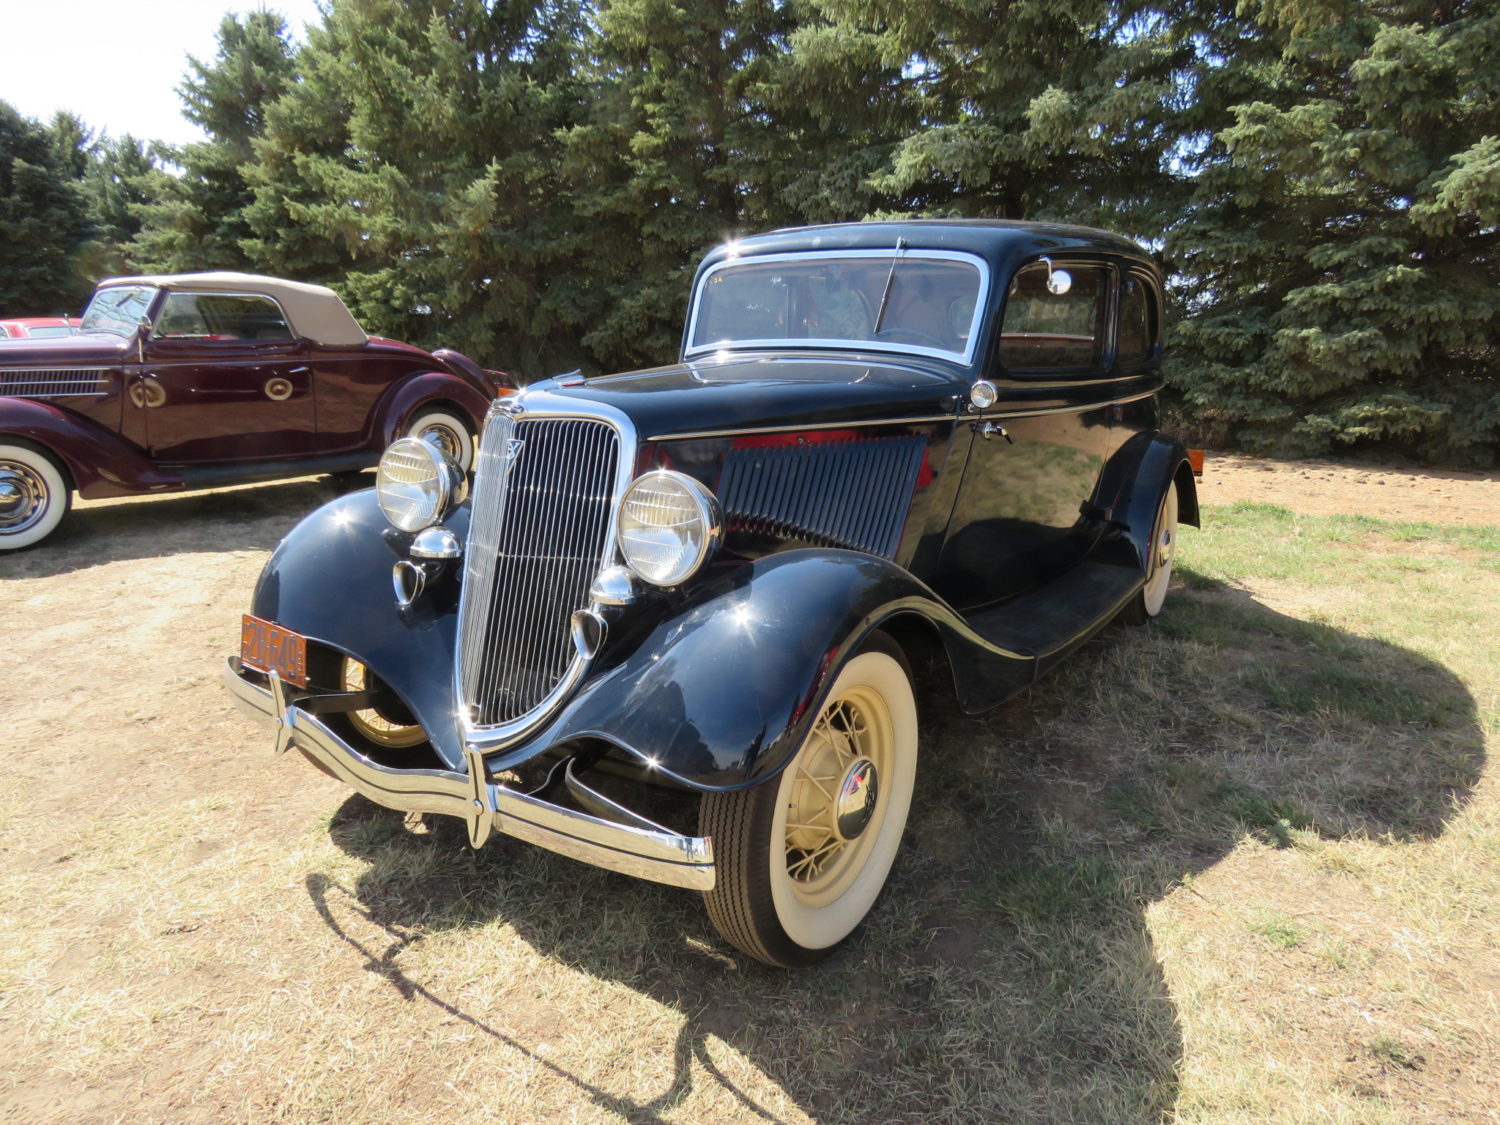 Fabulous Collector Cars, Antique Tractors, Memorabilia & More! The Krinke Collection - image 7